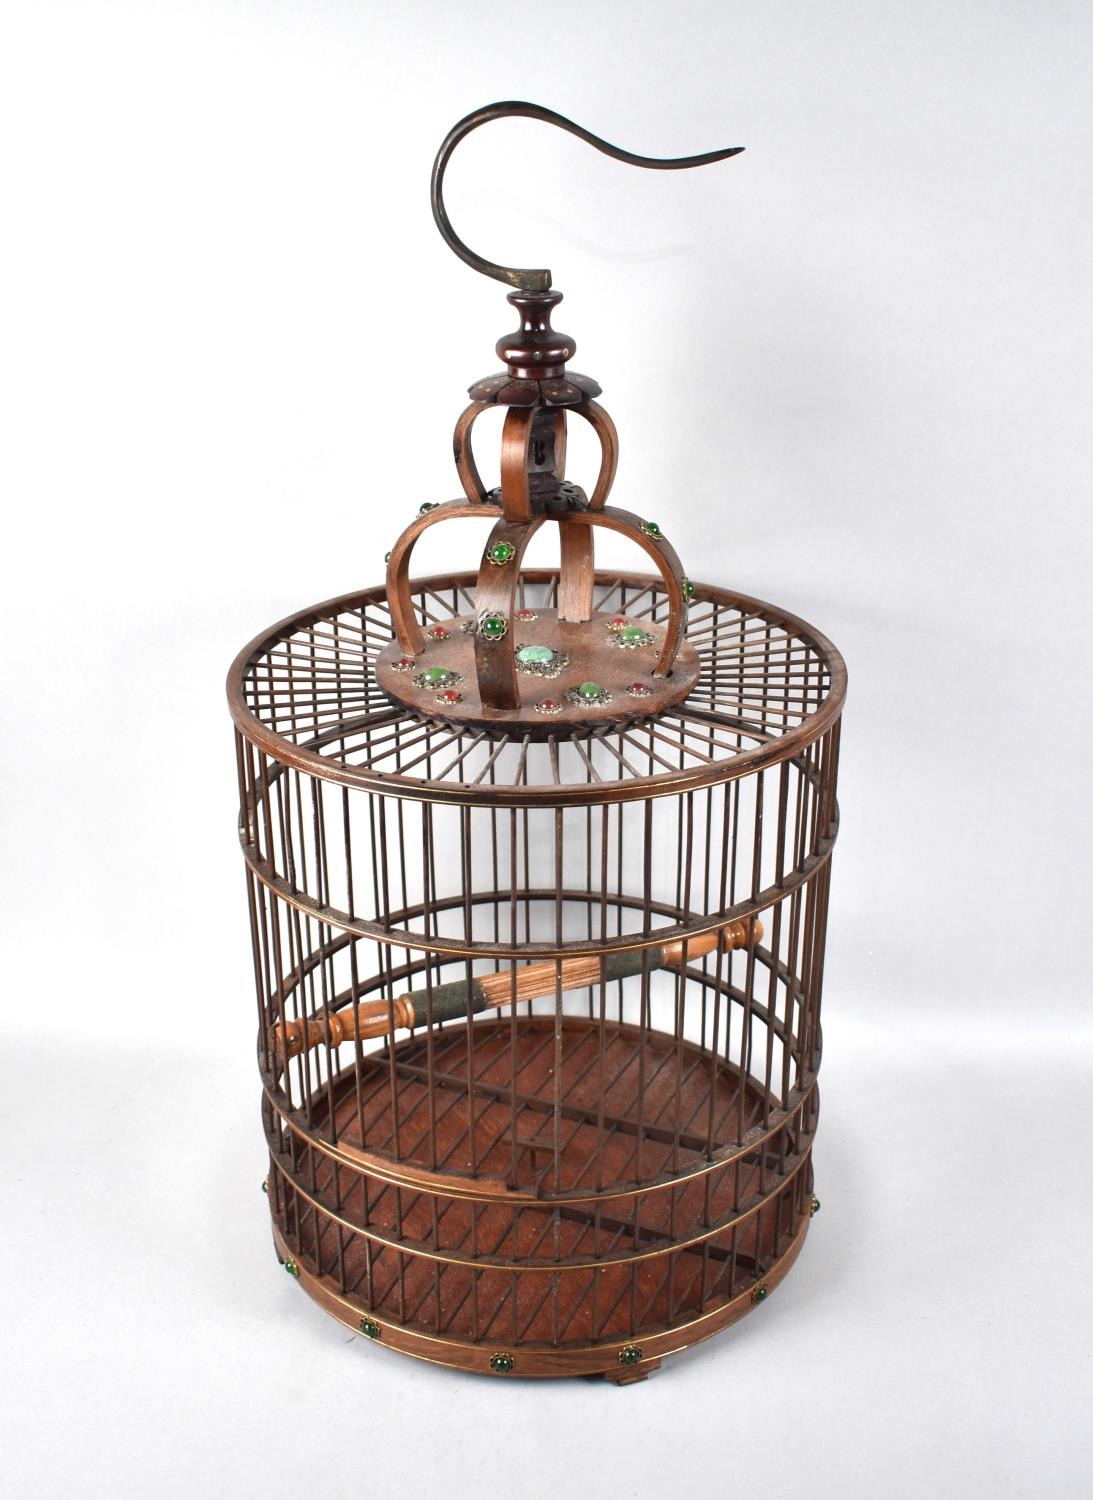 A Reproduction Cylindrical Birdcage with Jewelled Mounts, 64cms High